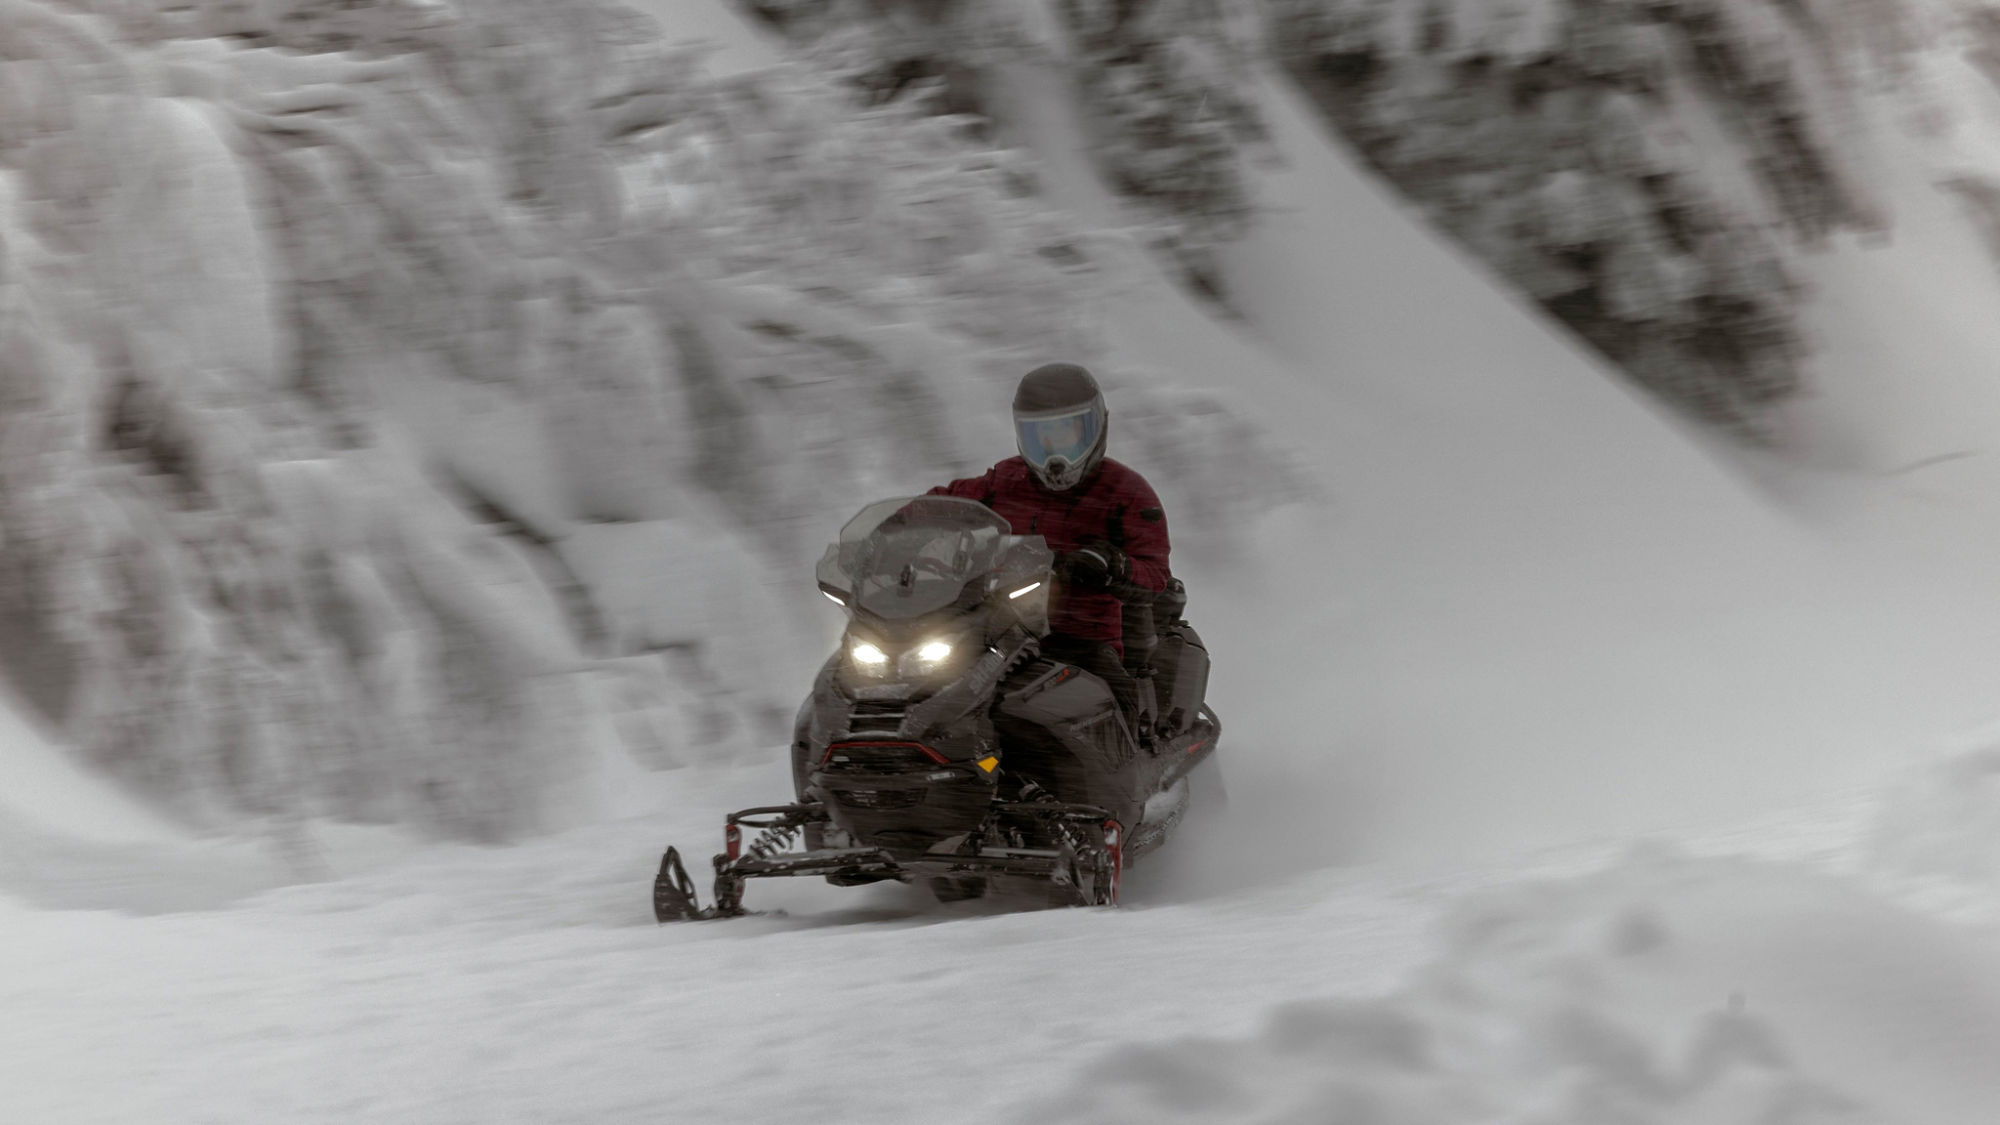 2025 Ski-Doo Renegade riding at high speeds in a snowy forest